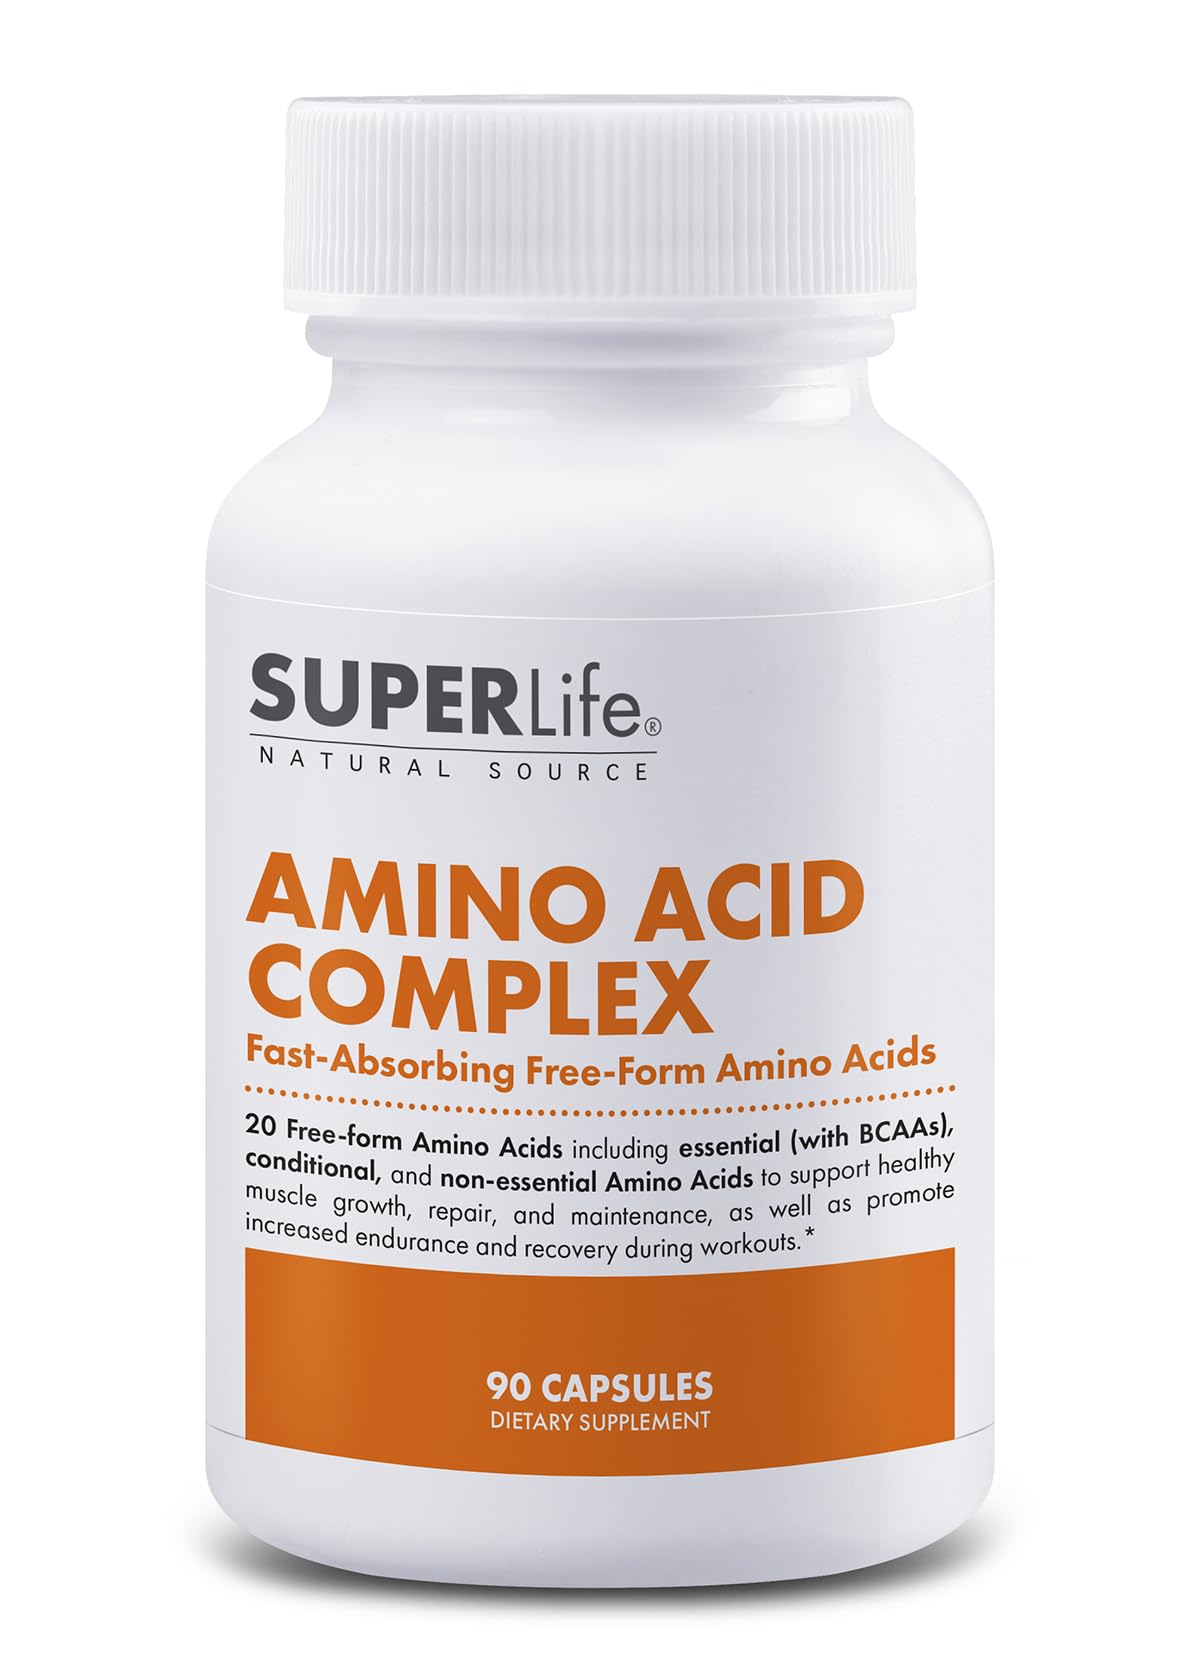 Amino Acid Complex - Fast Absorbing & Free Form Essential & Branched Chain Amino Acids BCAAs | Supports Muscle Growth, Strength & Recovery | Supplement - 90 Capsules